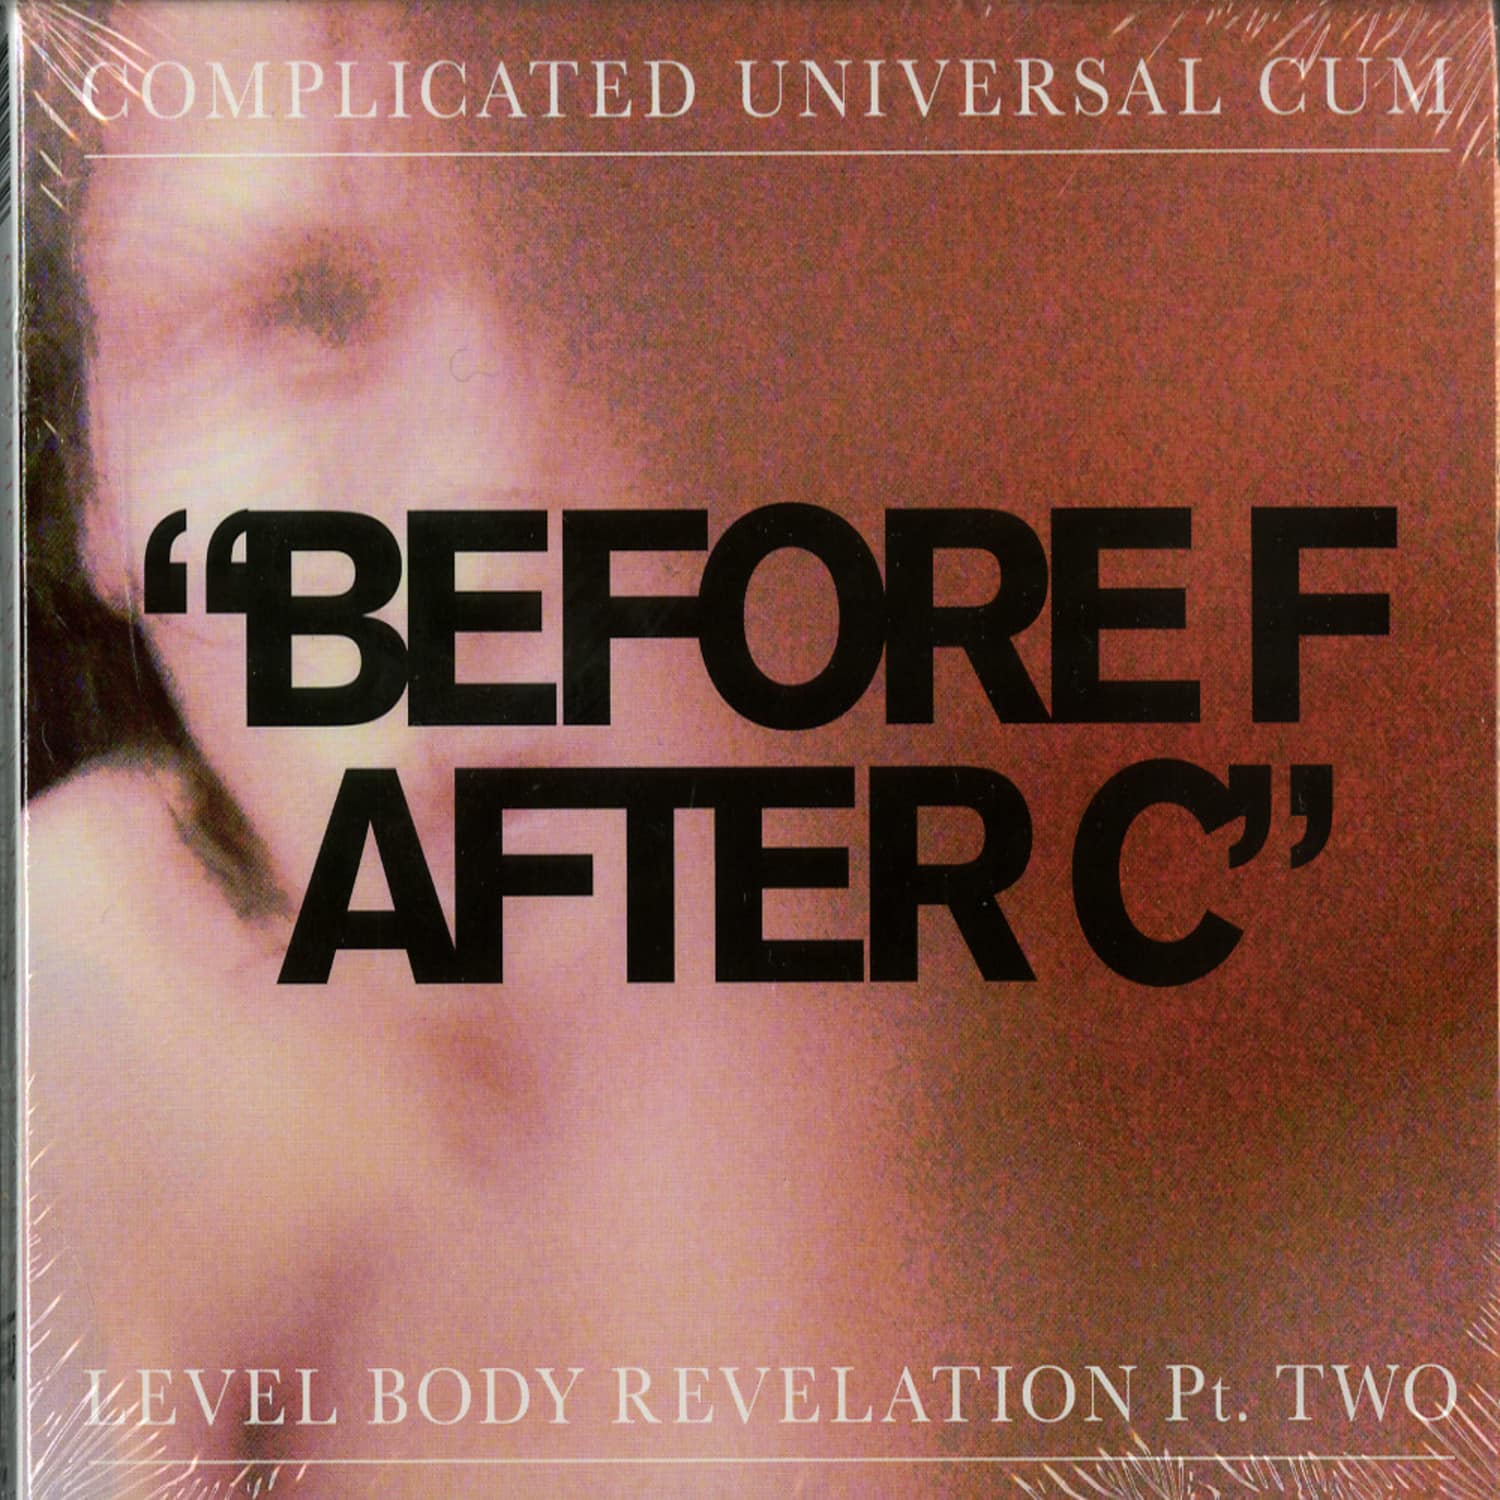 Complicated Universal Cum - HELLO EXIT HARMONY - BEFORE F AFTER C 